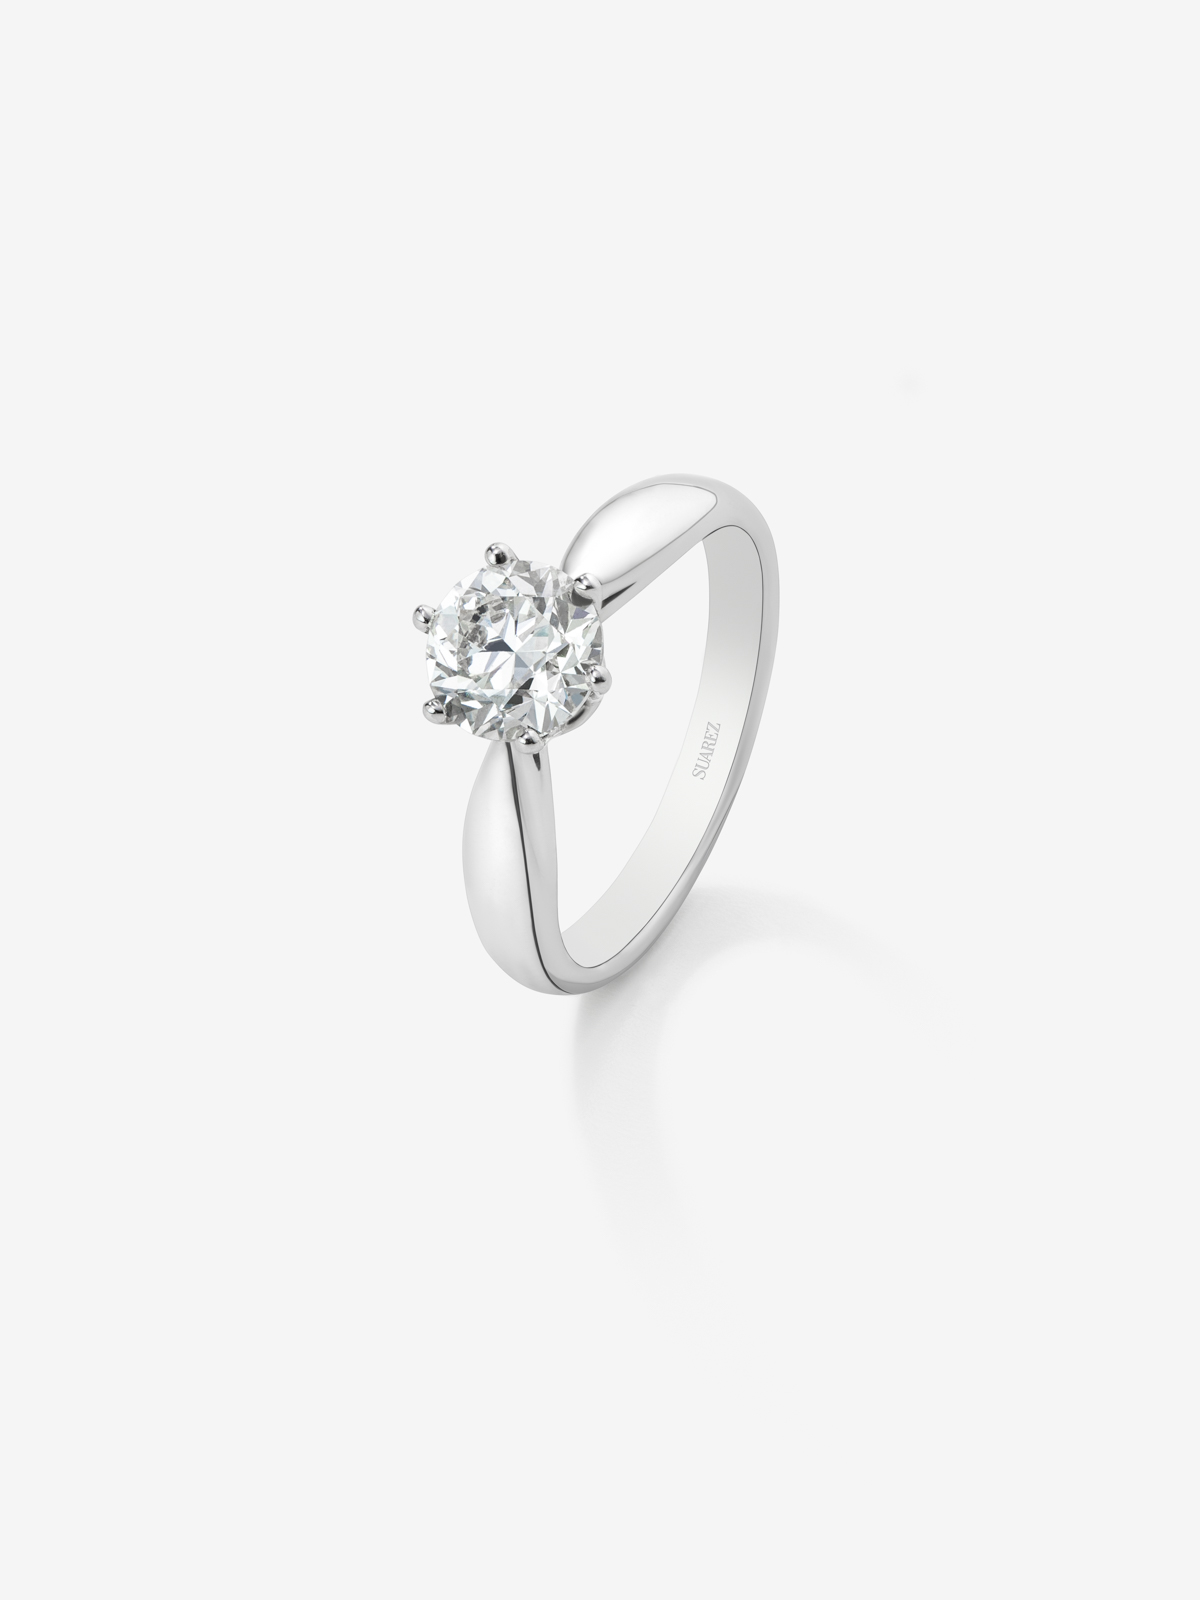 18K White Gold Commitment Ring with 1.5 carat central diamond